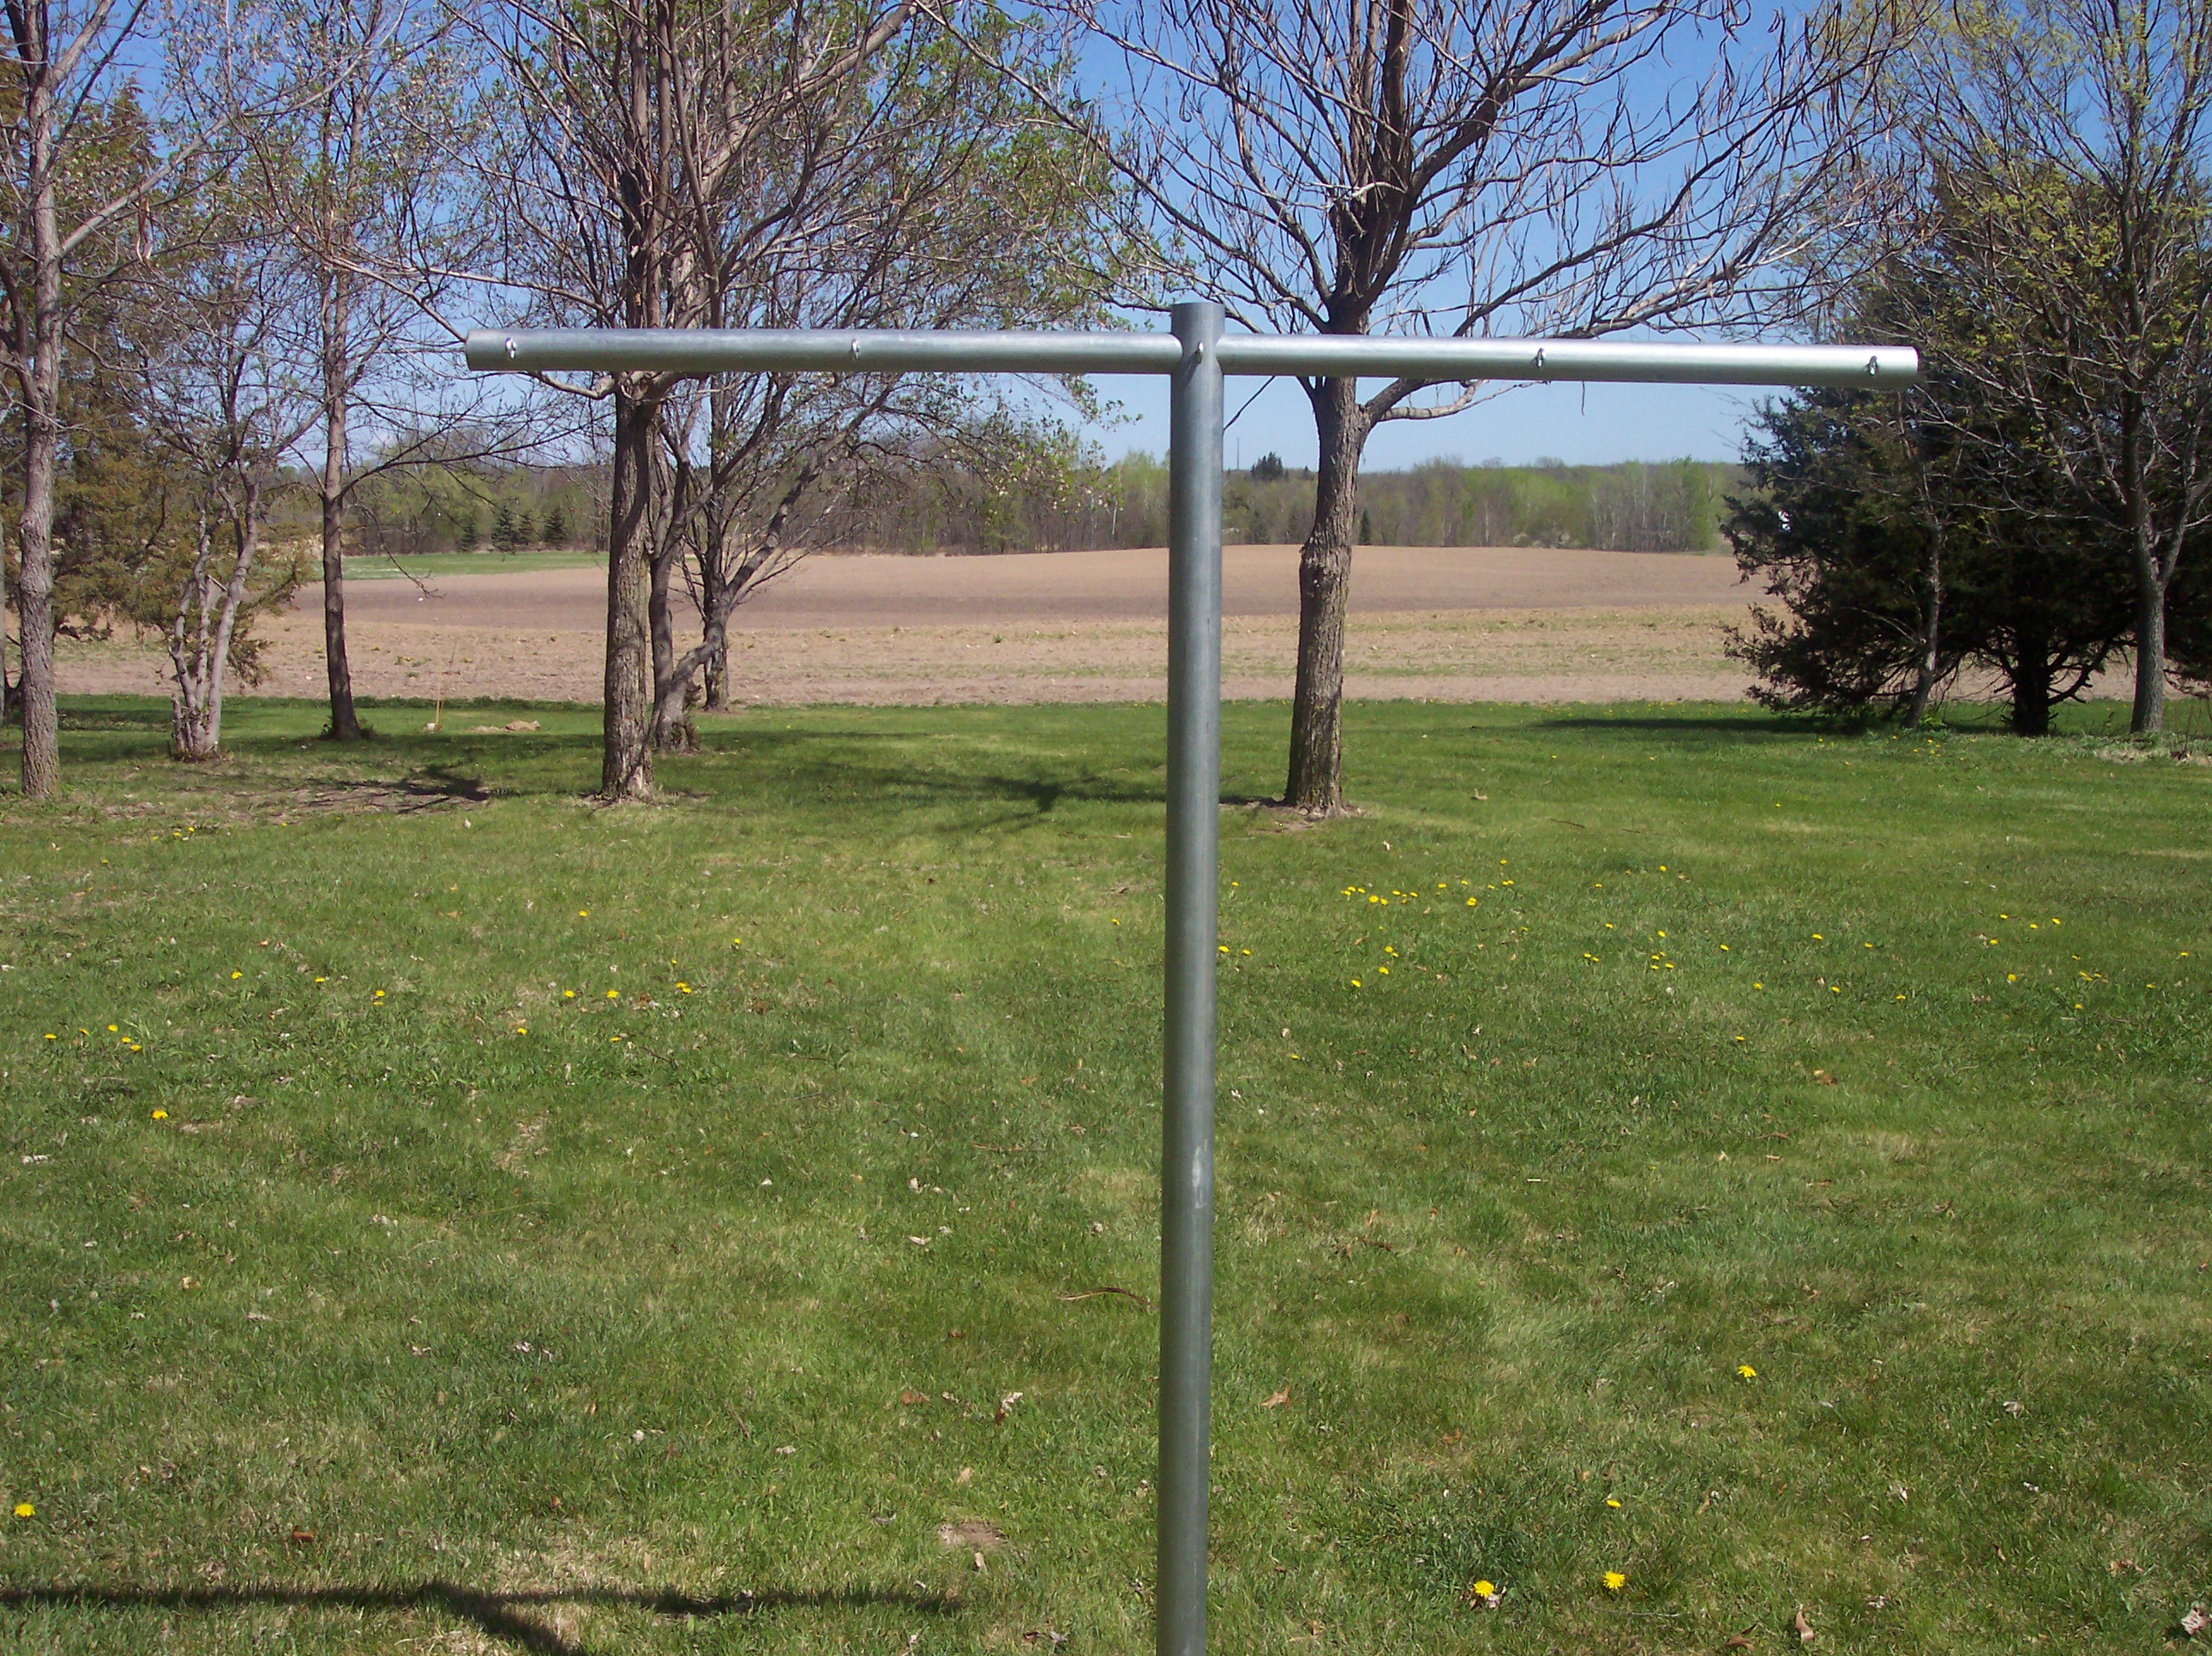 Clothes Line, Outdoor Image & Photo (Free Trial)